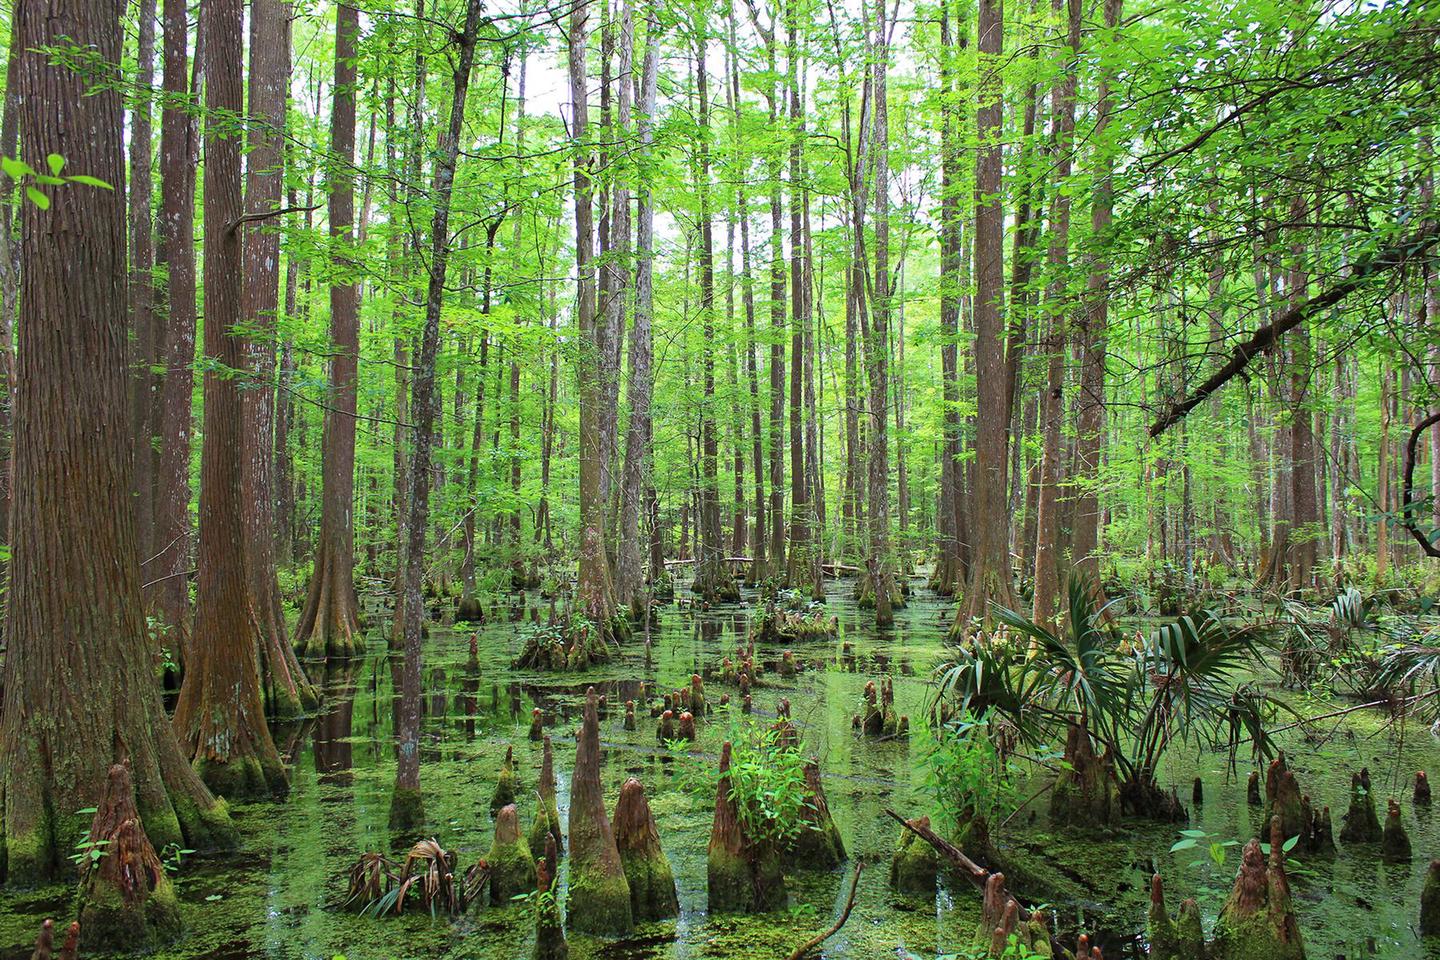 Preview photo of Big Thicket National Preserve